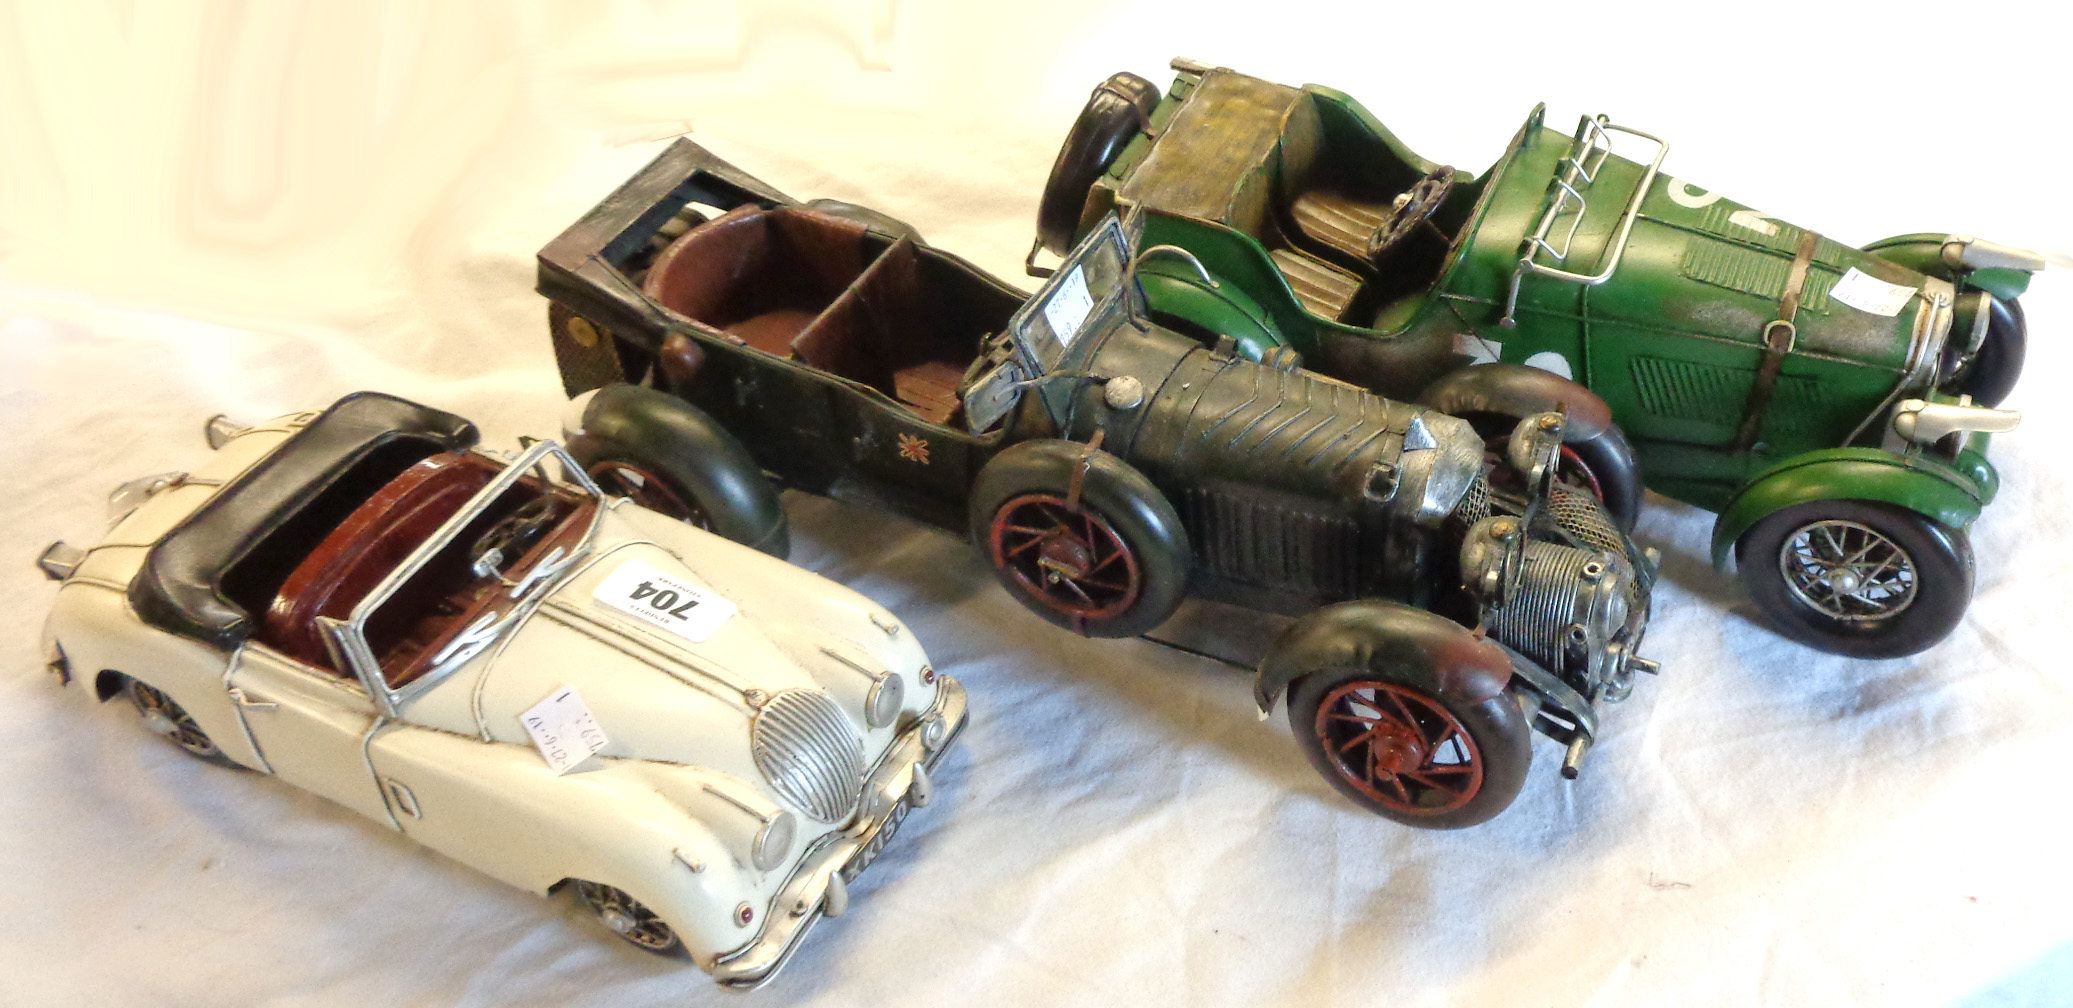 A modern tinplate model of a vintage Bentley, a similar Jaguar and another